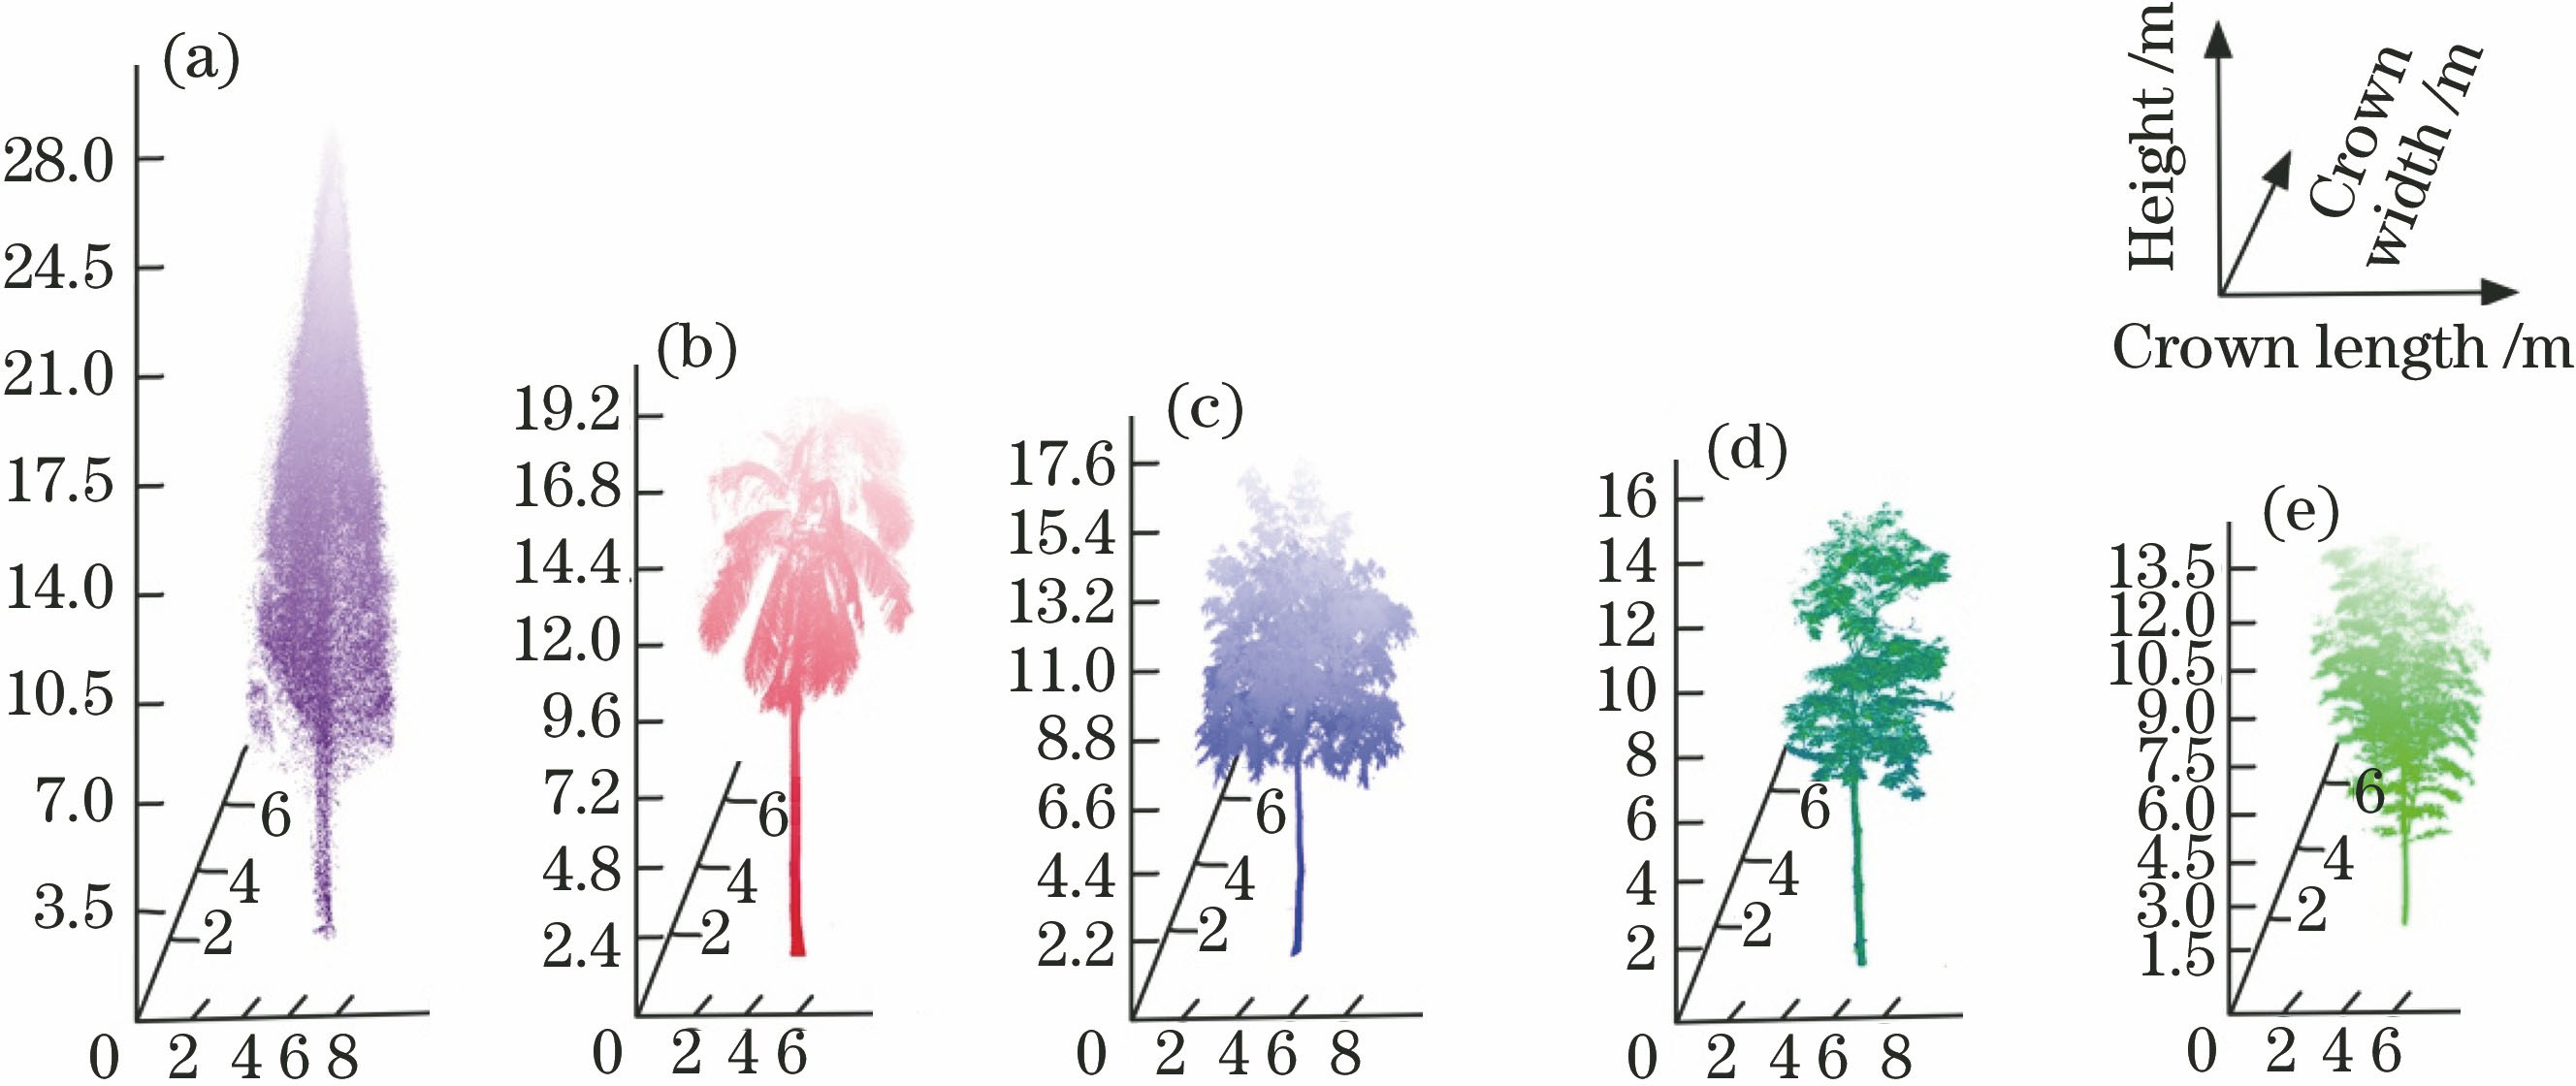 Scanned point clouds of sample trees. (a) Metasequoia; (b) palm; (c) spaindus; (d) rubber tree; (e) bamboo